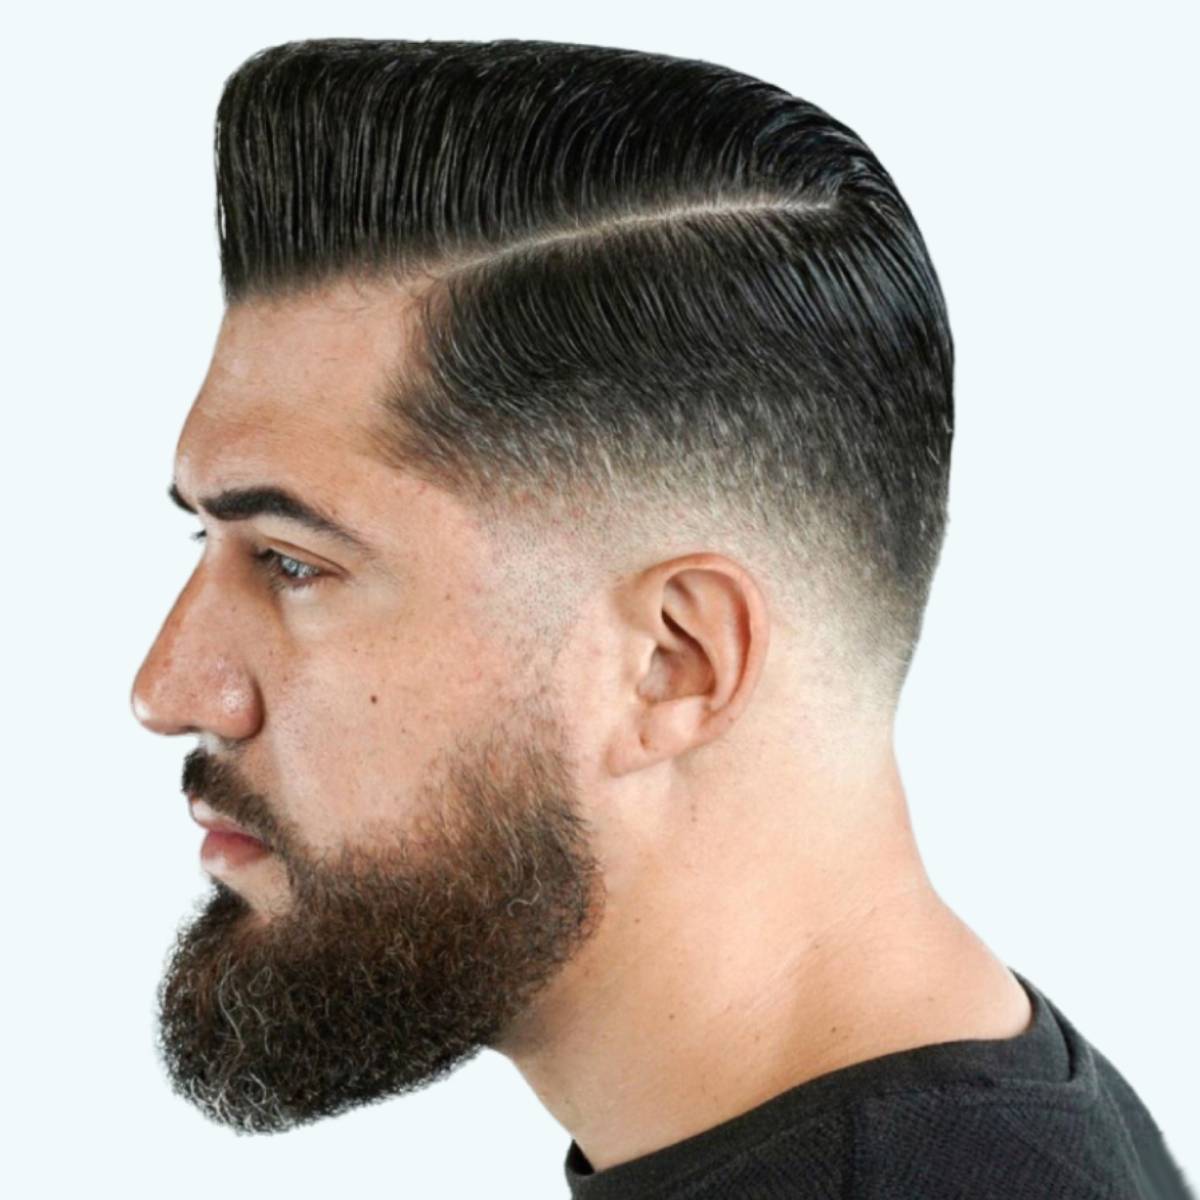 43 Good Haircuts For Men in 2023  Professional hairstyles for men,  Haircuts for men, Comb over fade haircut